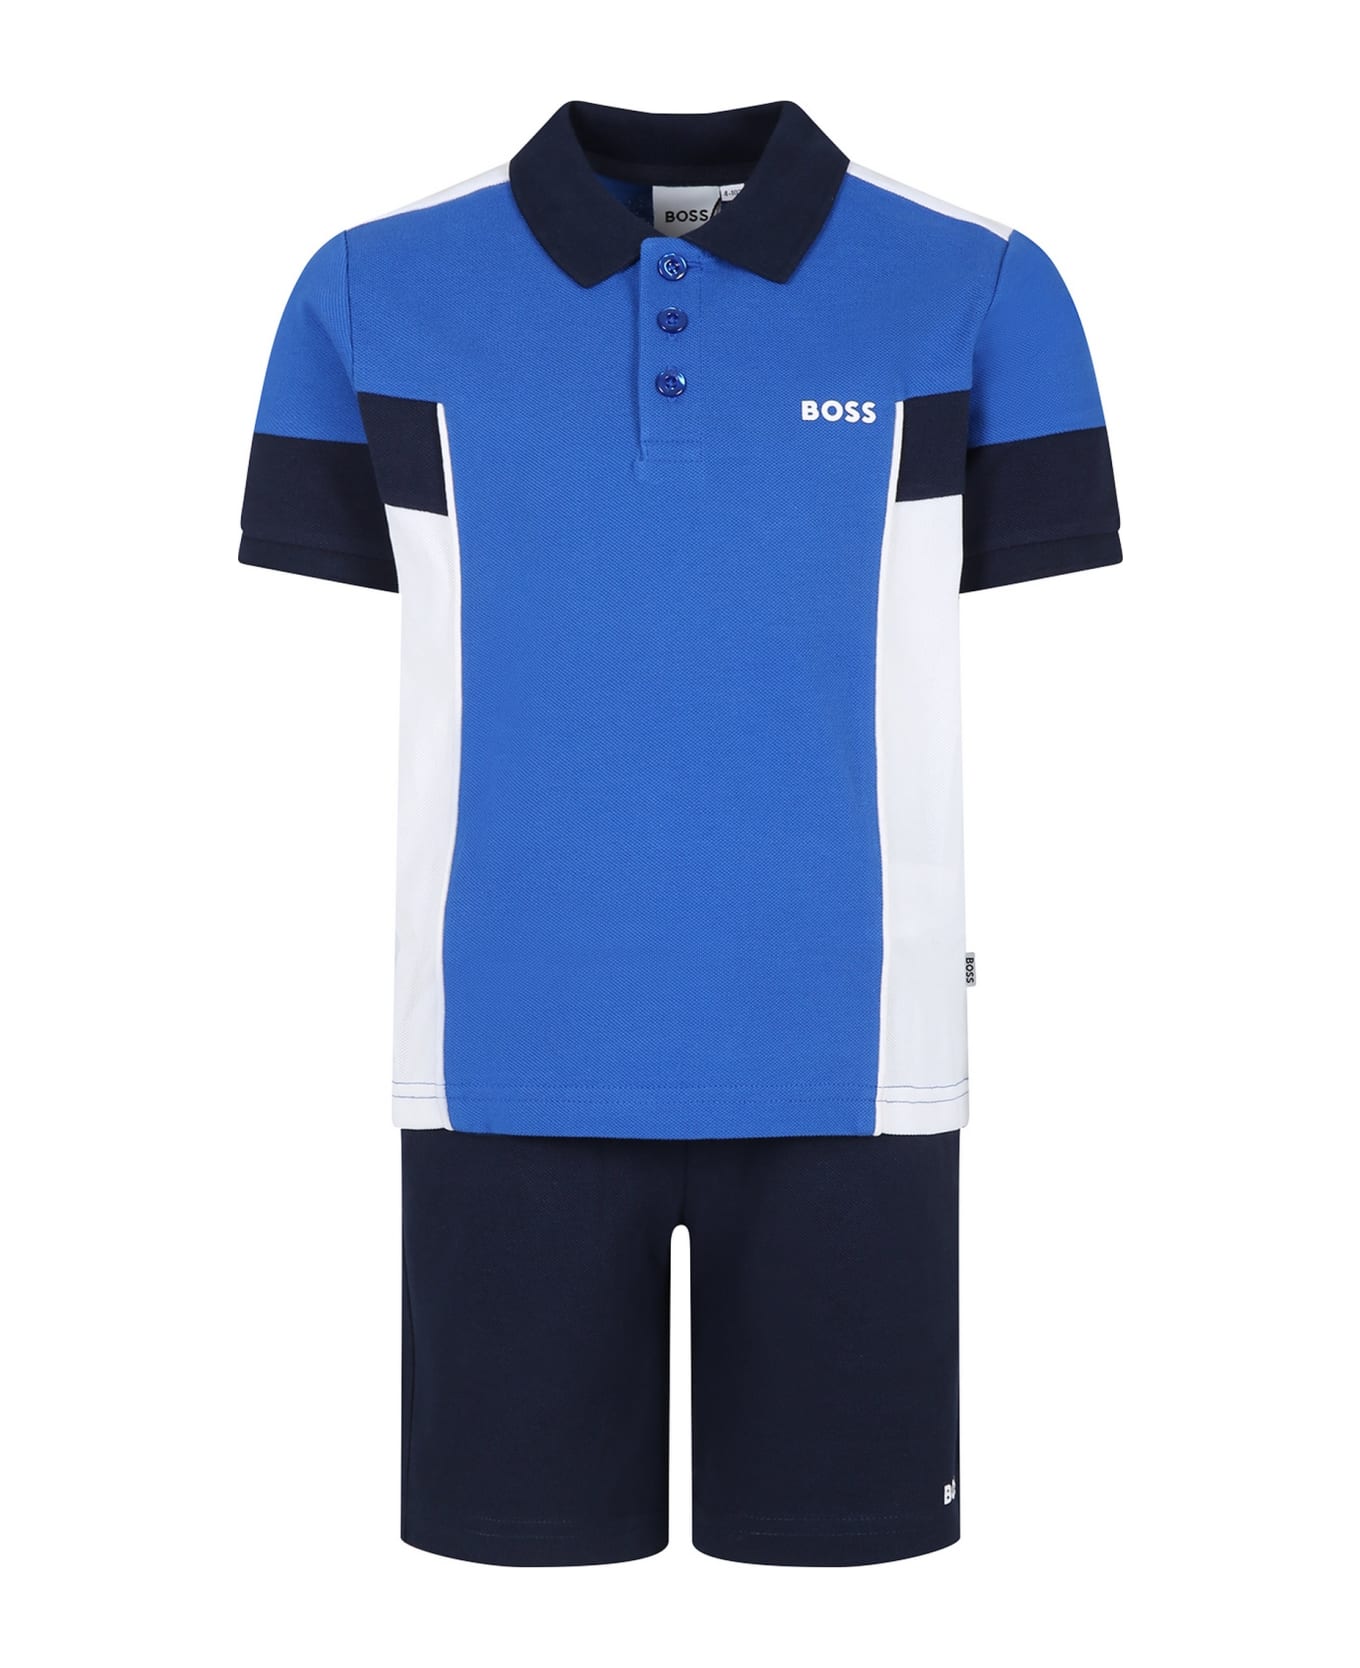 Hugo Boss Blue Suit For Boy With Logo - Blue